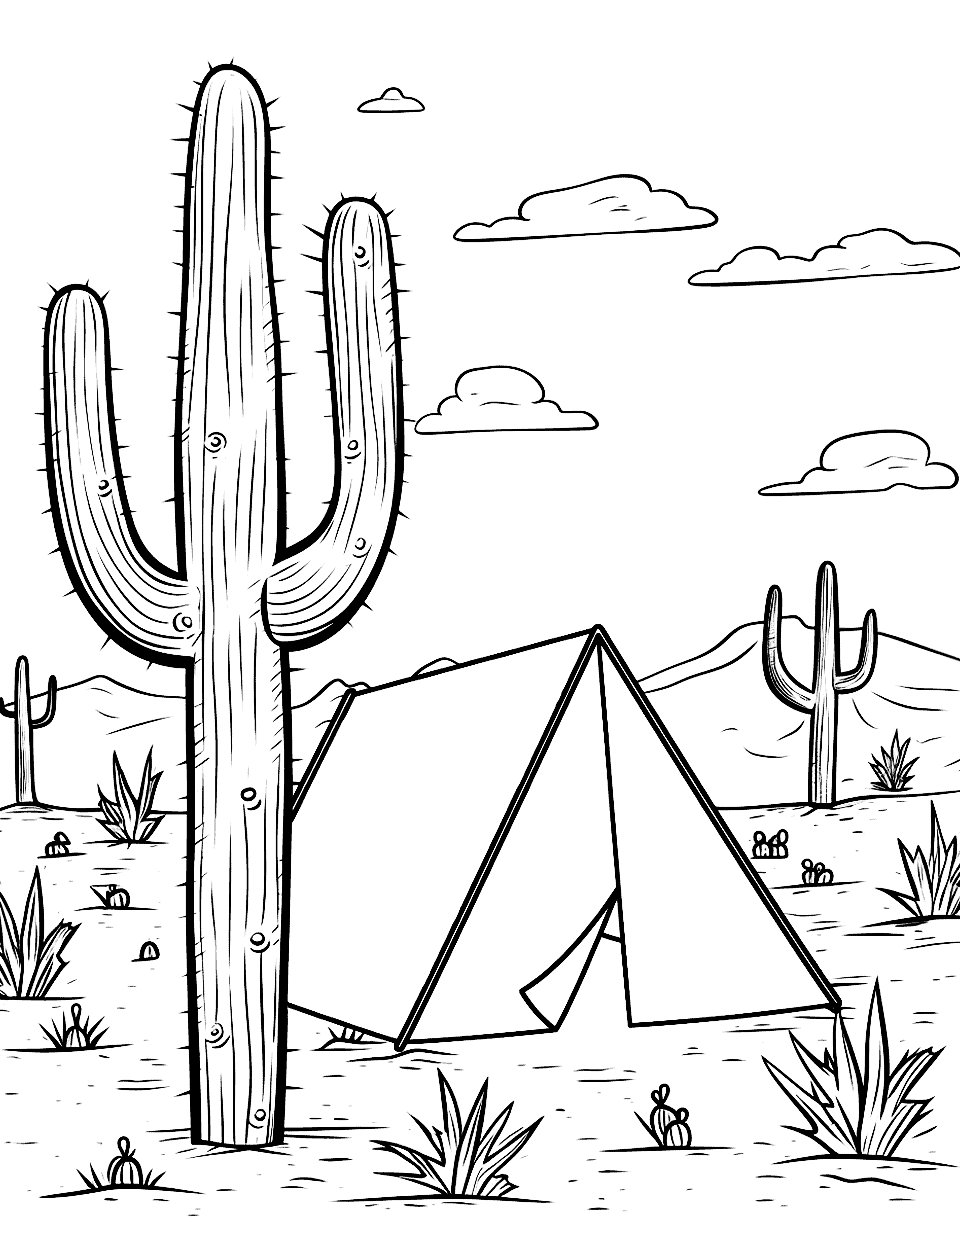 Desert Camping with Cacti Cactus Coloring Page - A camping scene in the desert with a tent and cacti in the background.